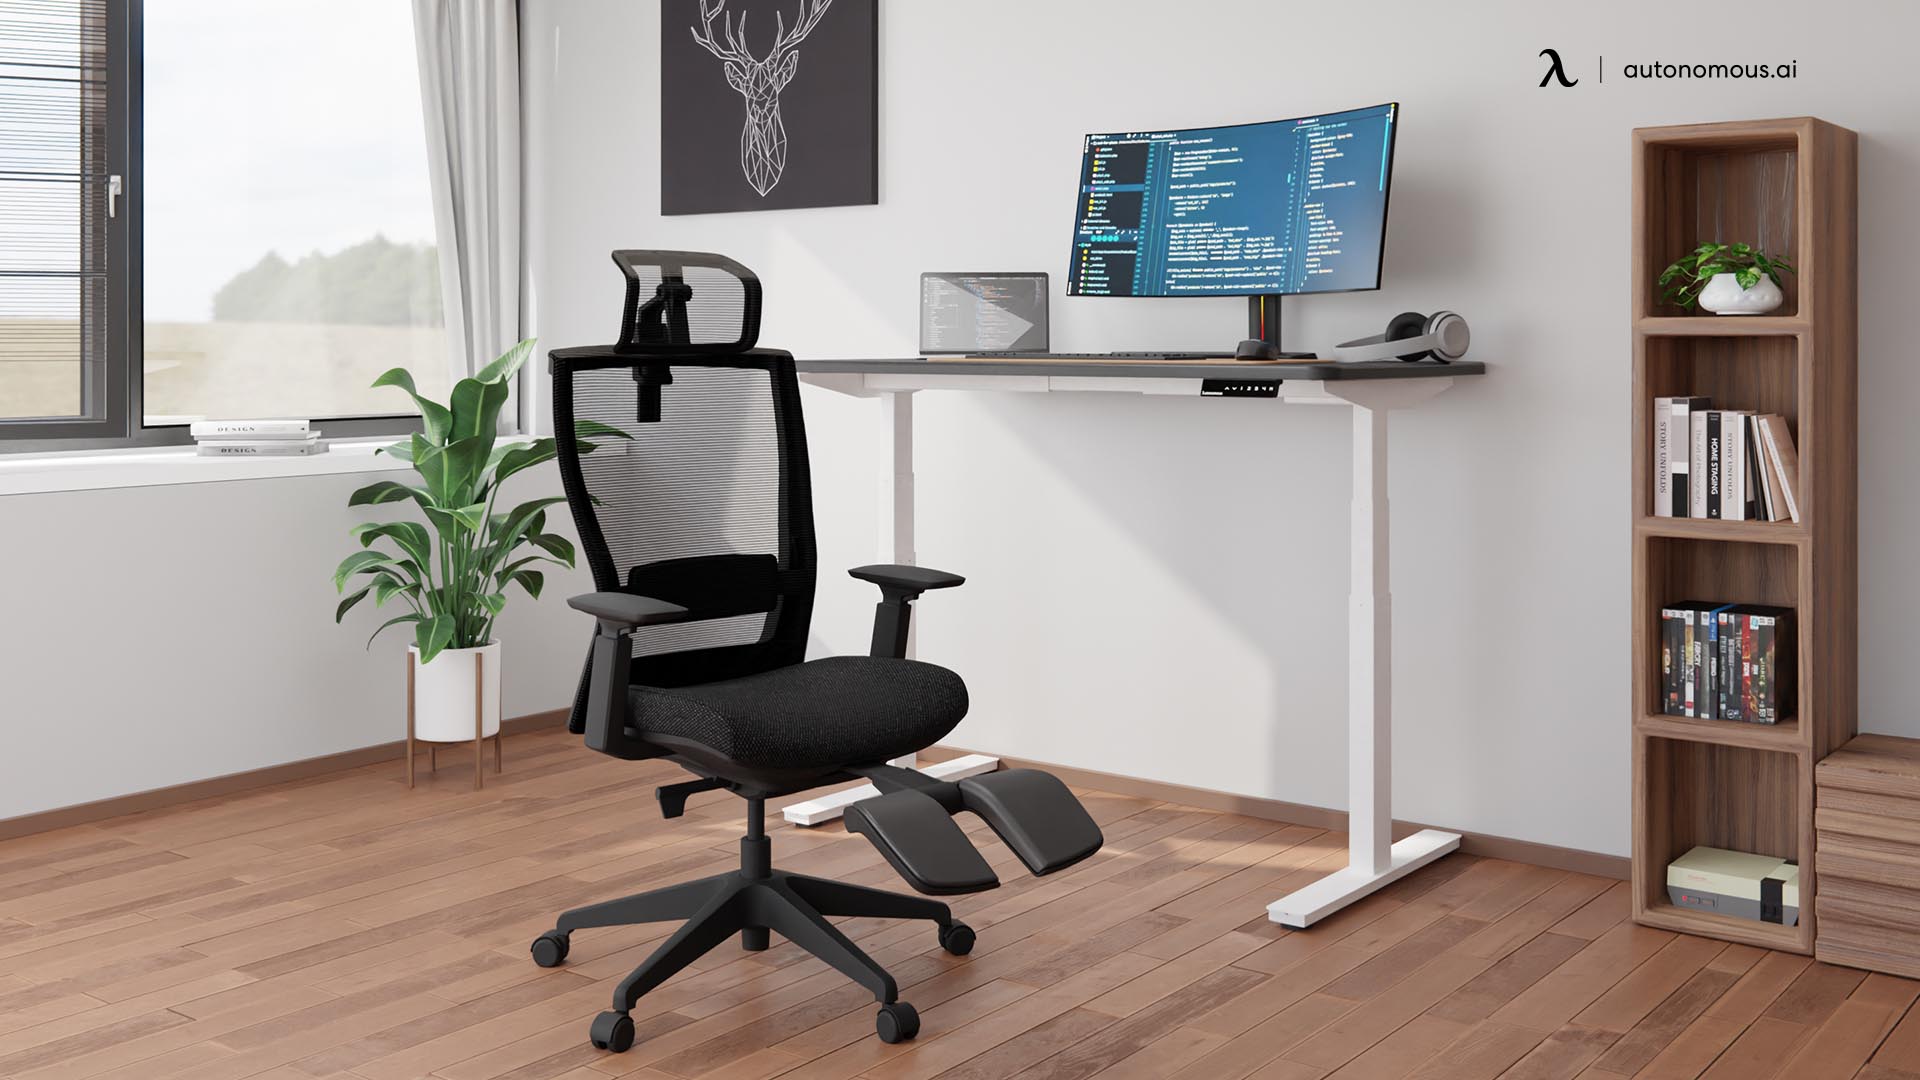 Why Should You Buy an Office Furniture Set from a Single Brand?